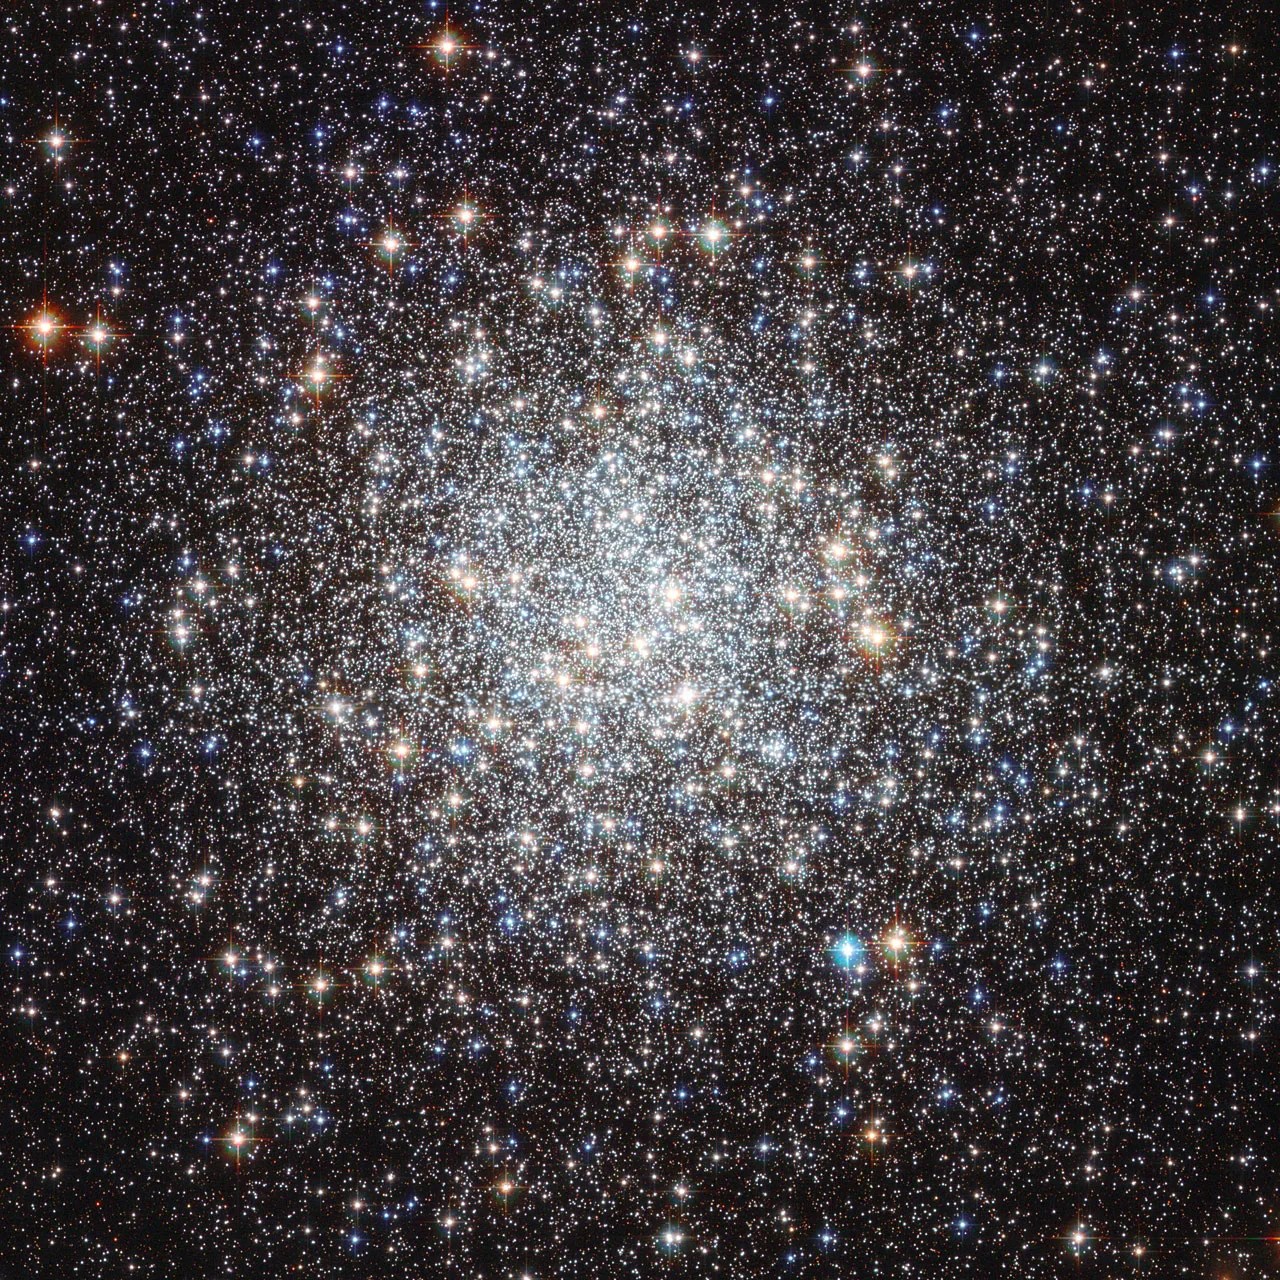 dazzling starfield of Messier 9 bursts outward from a central cluster